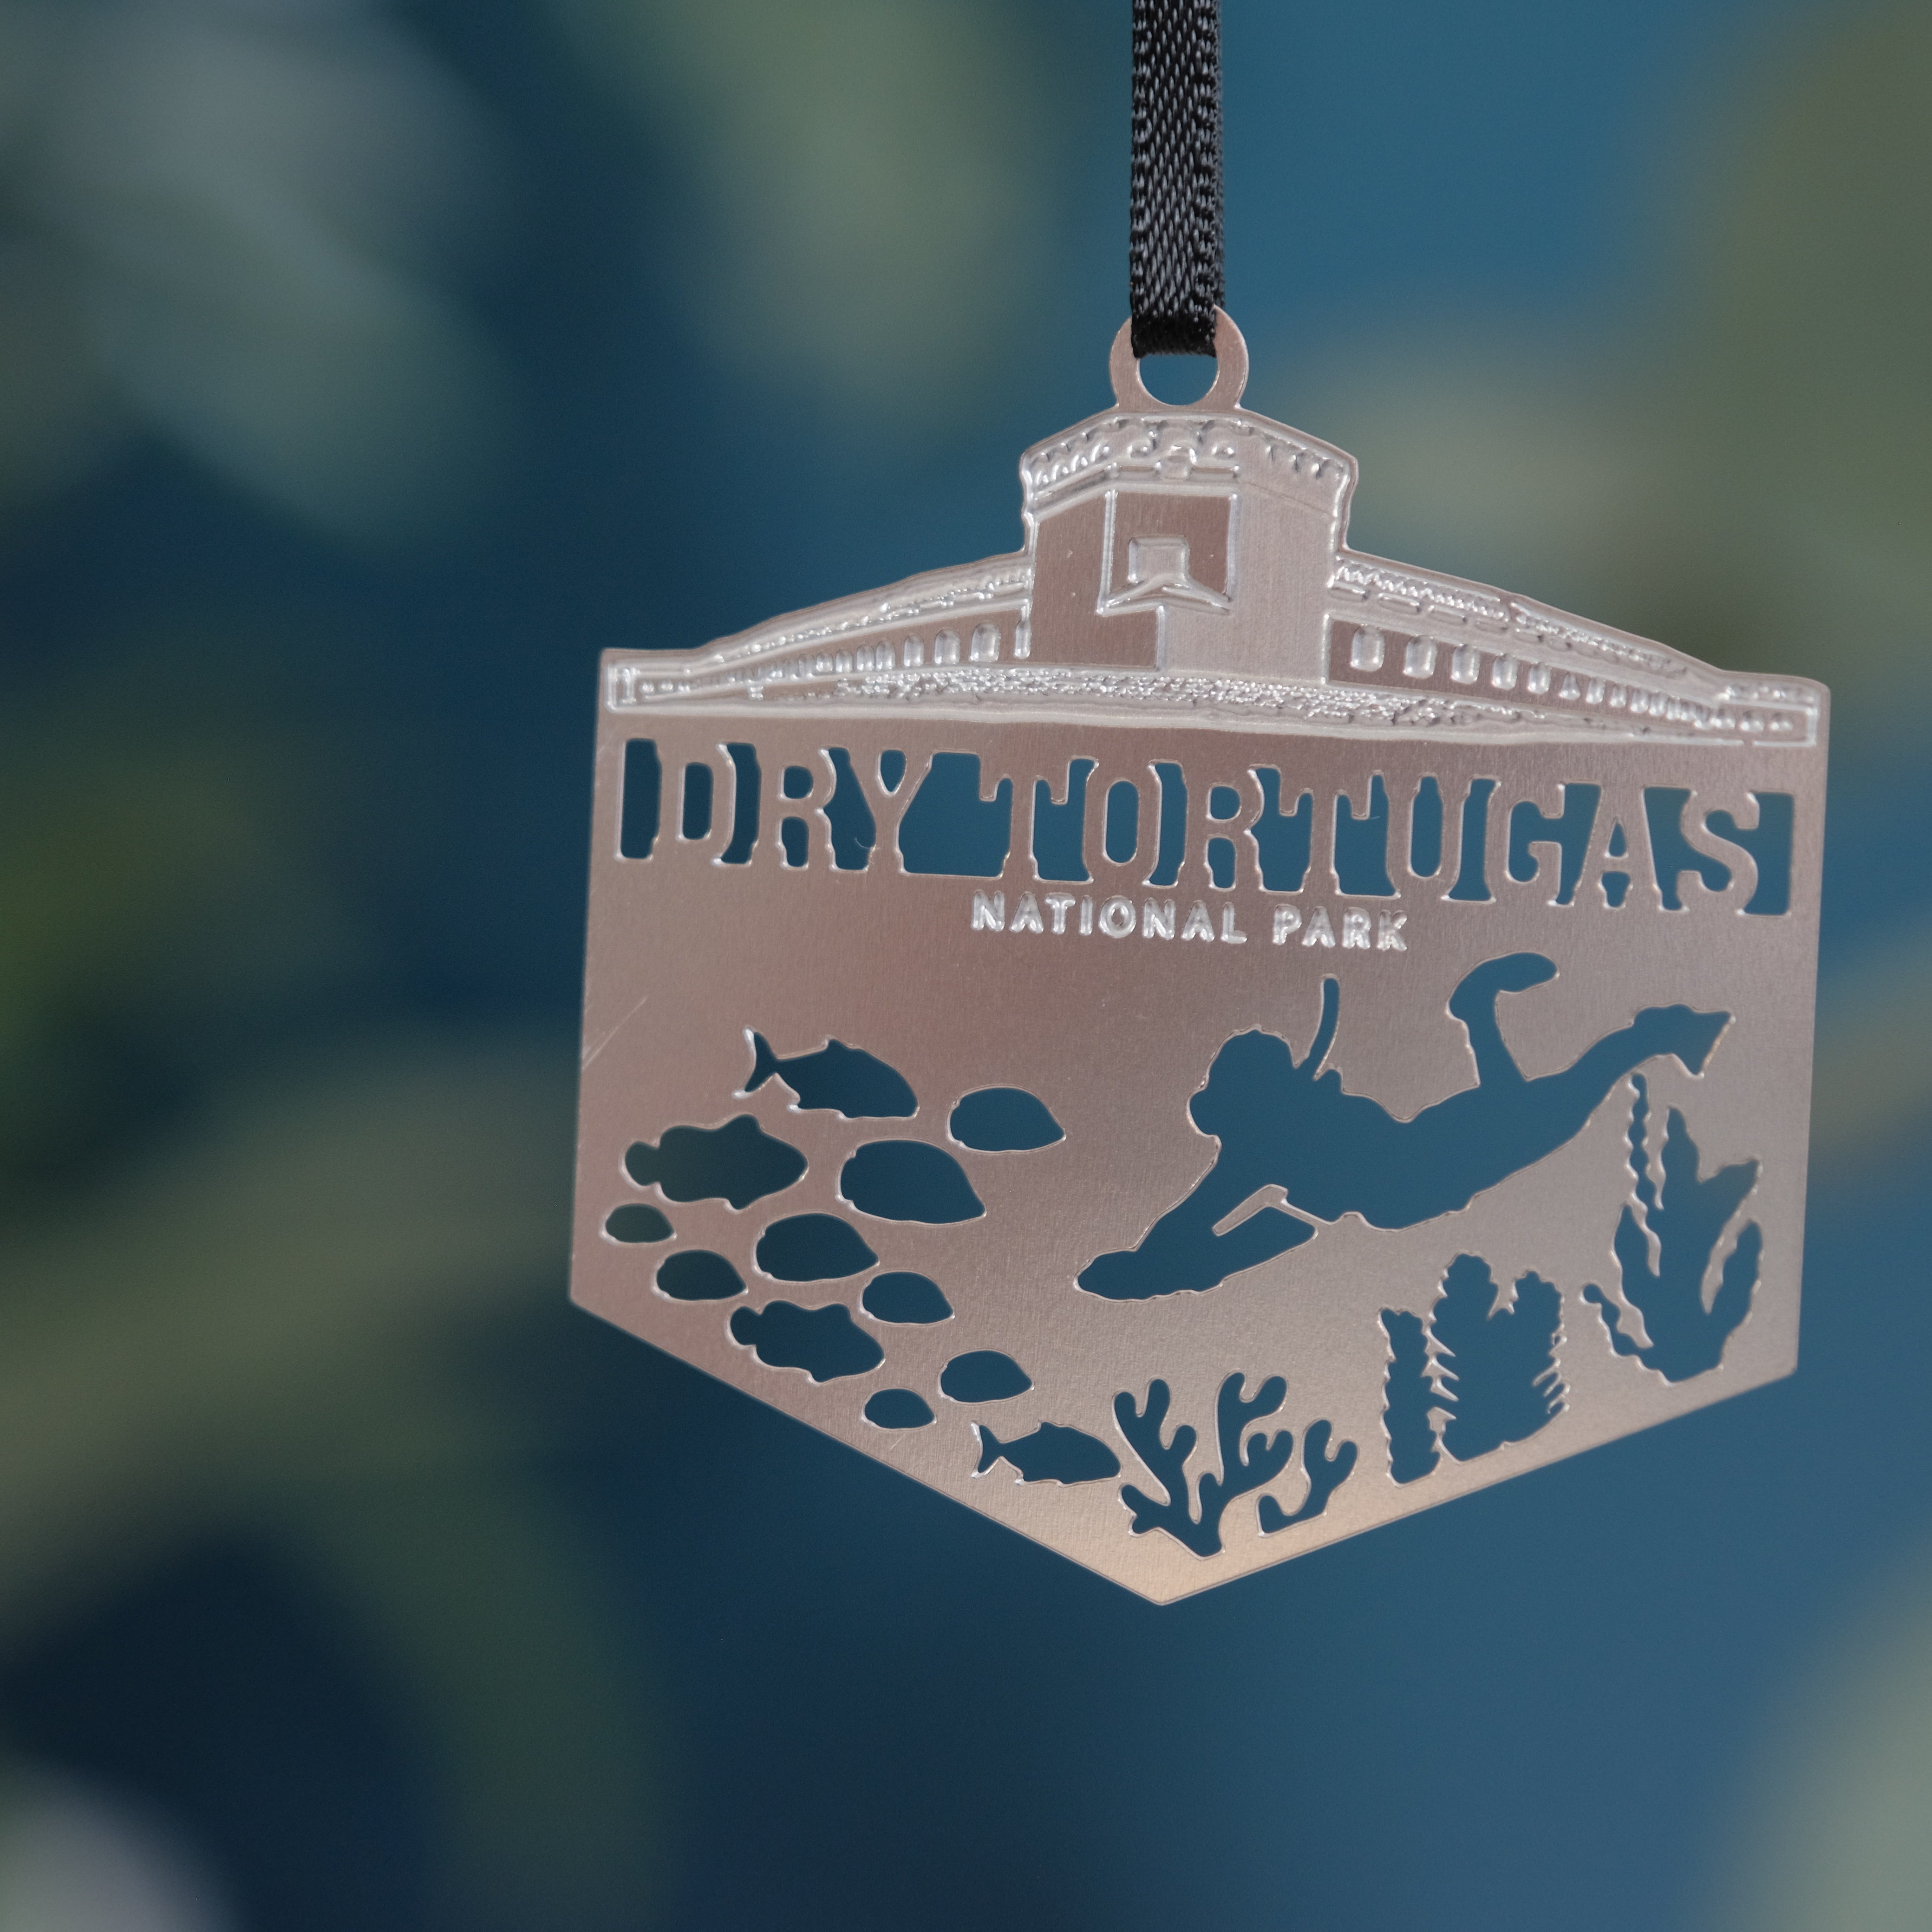 National Park Gift - Dry Tortugas National Park Ornament